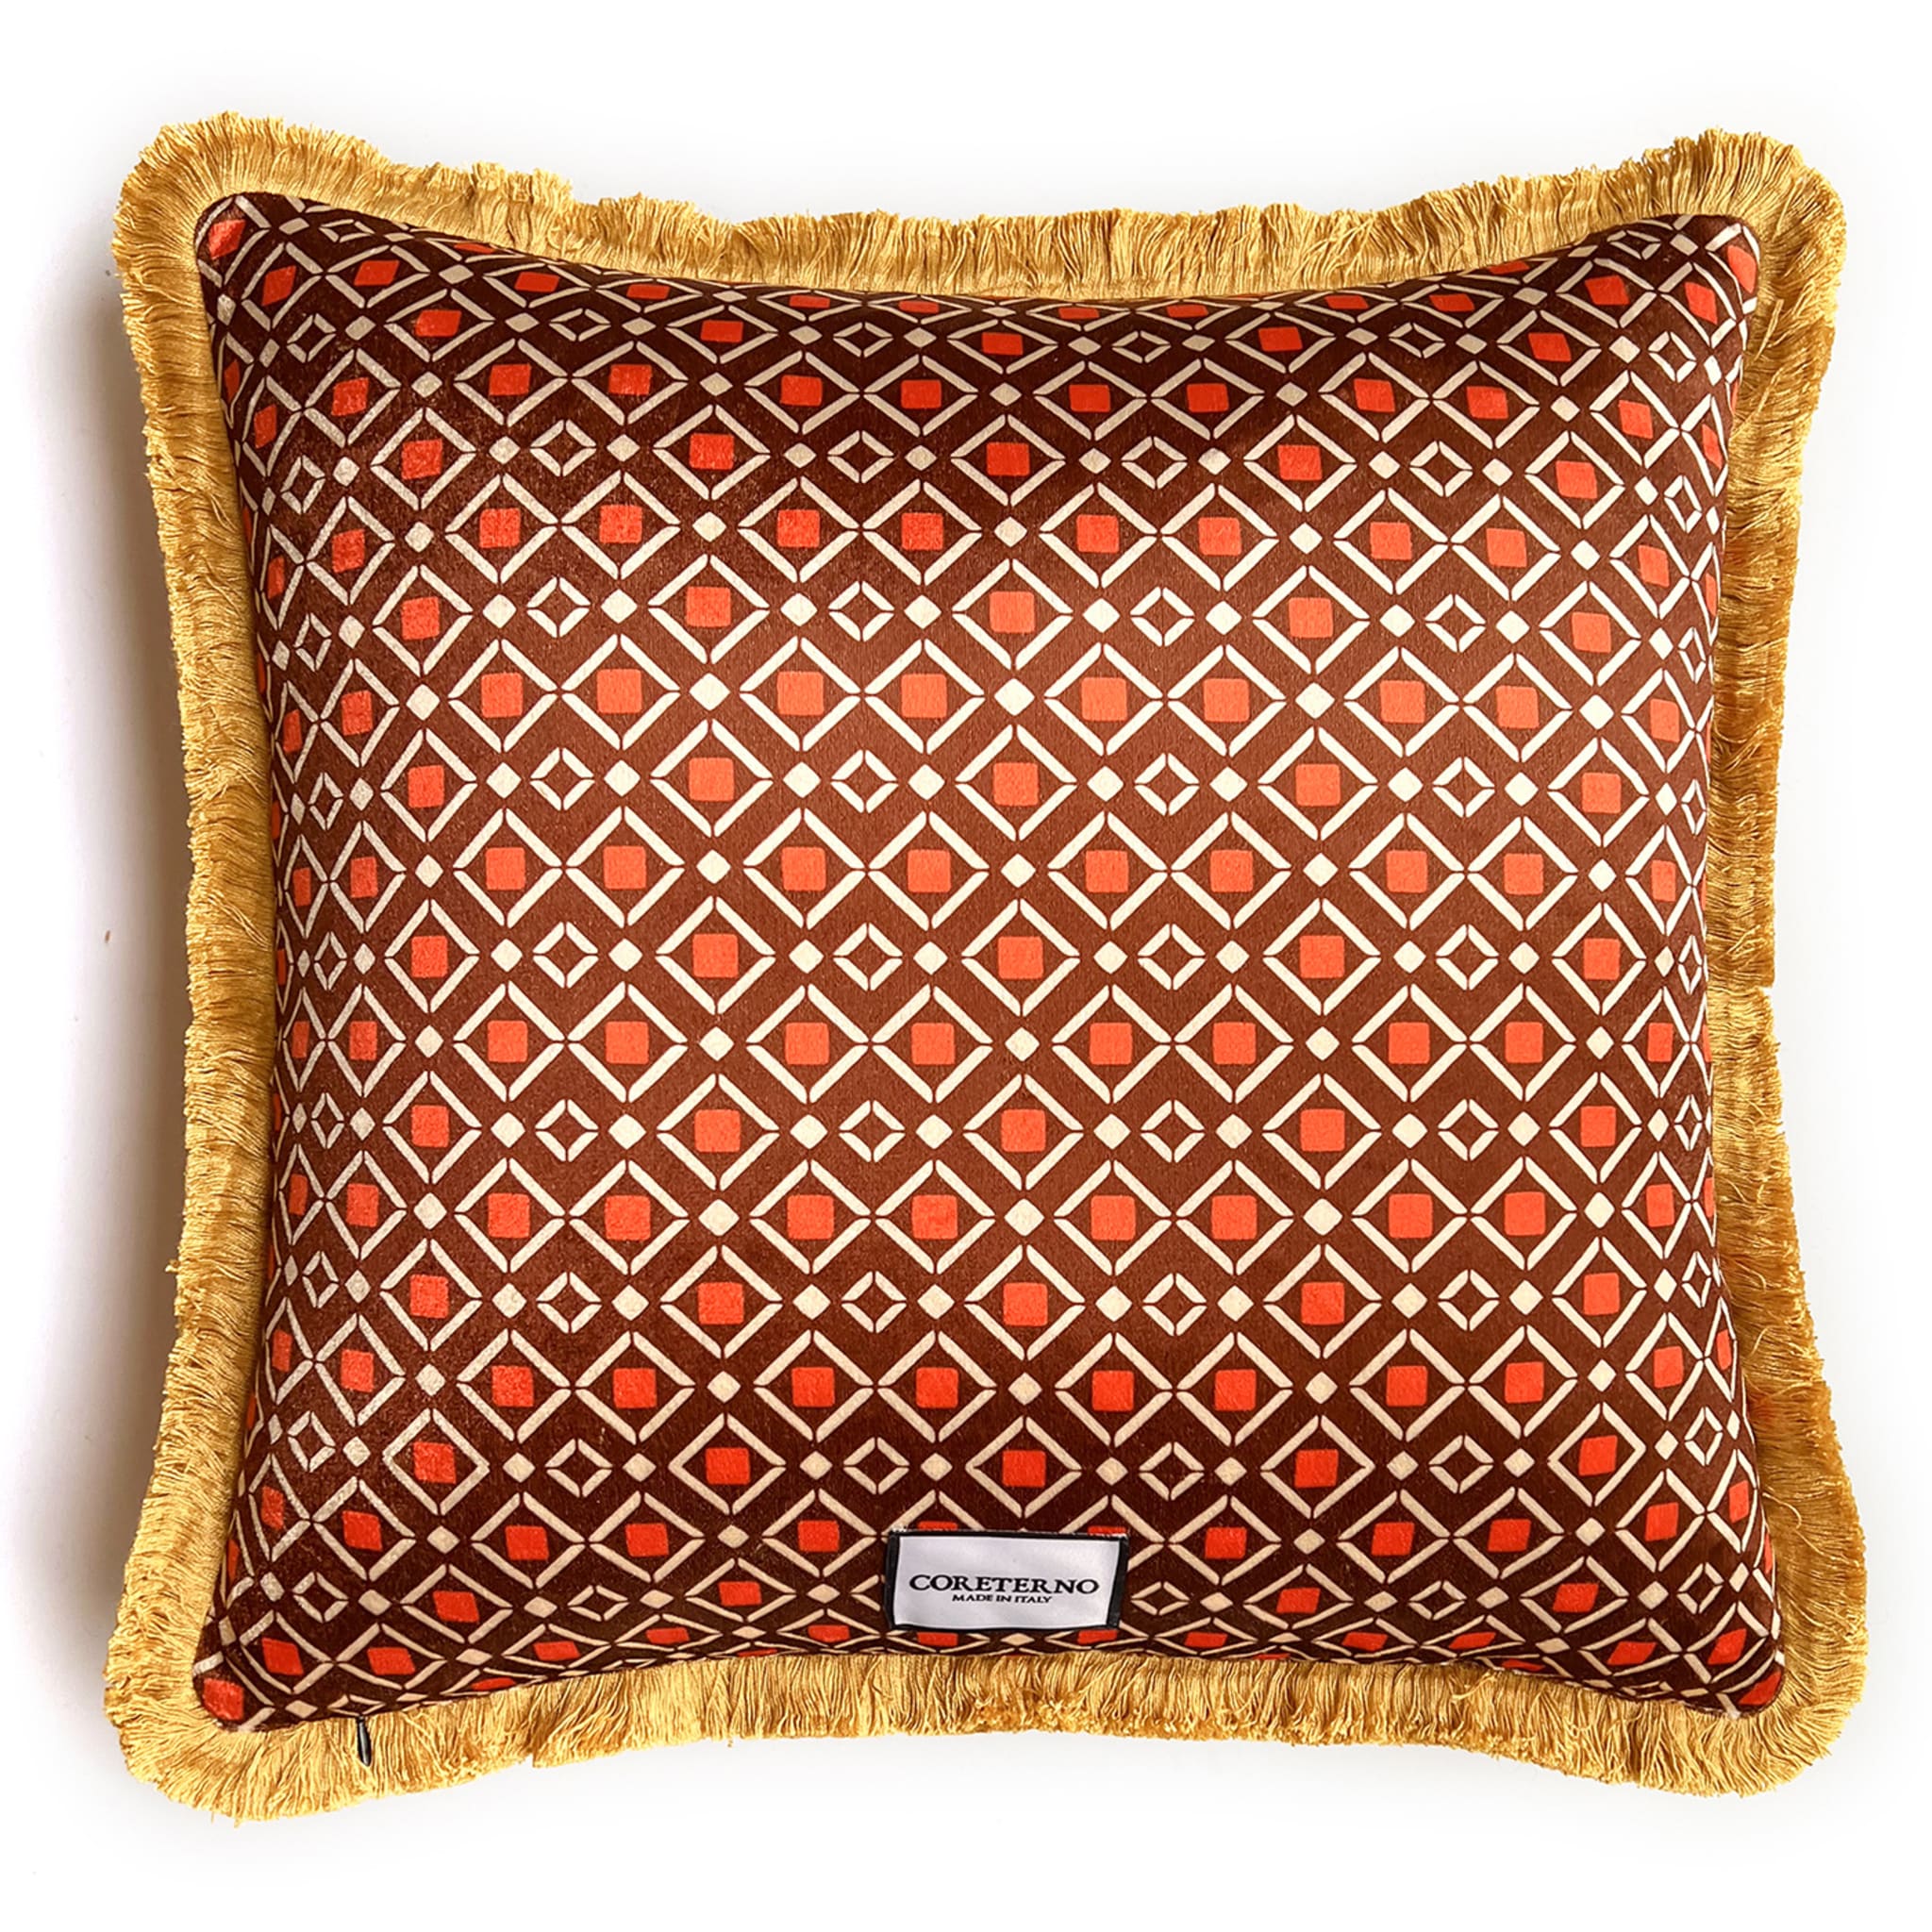 Lovely Tiger Polychrome Square Cushion - Alternative view 1